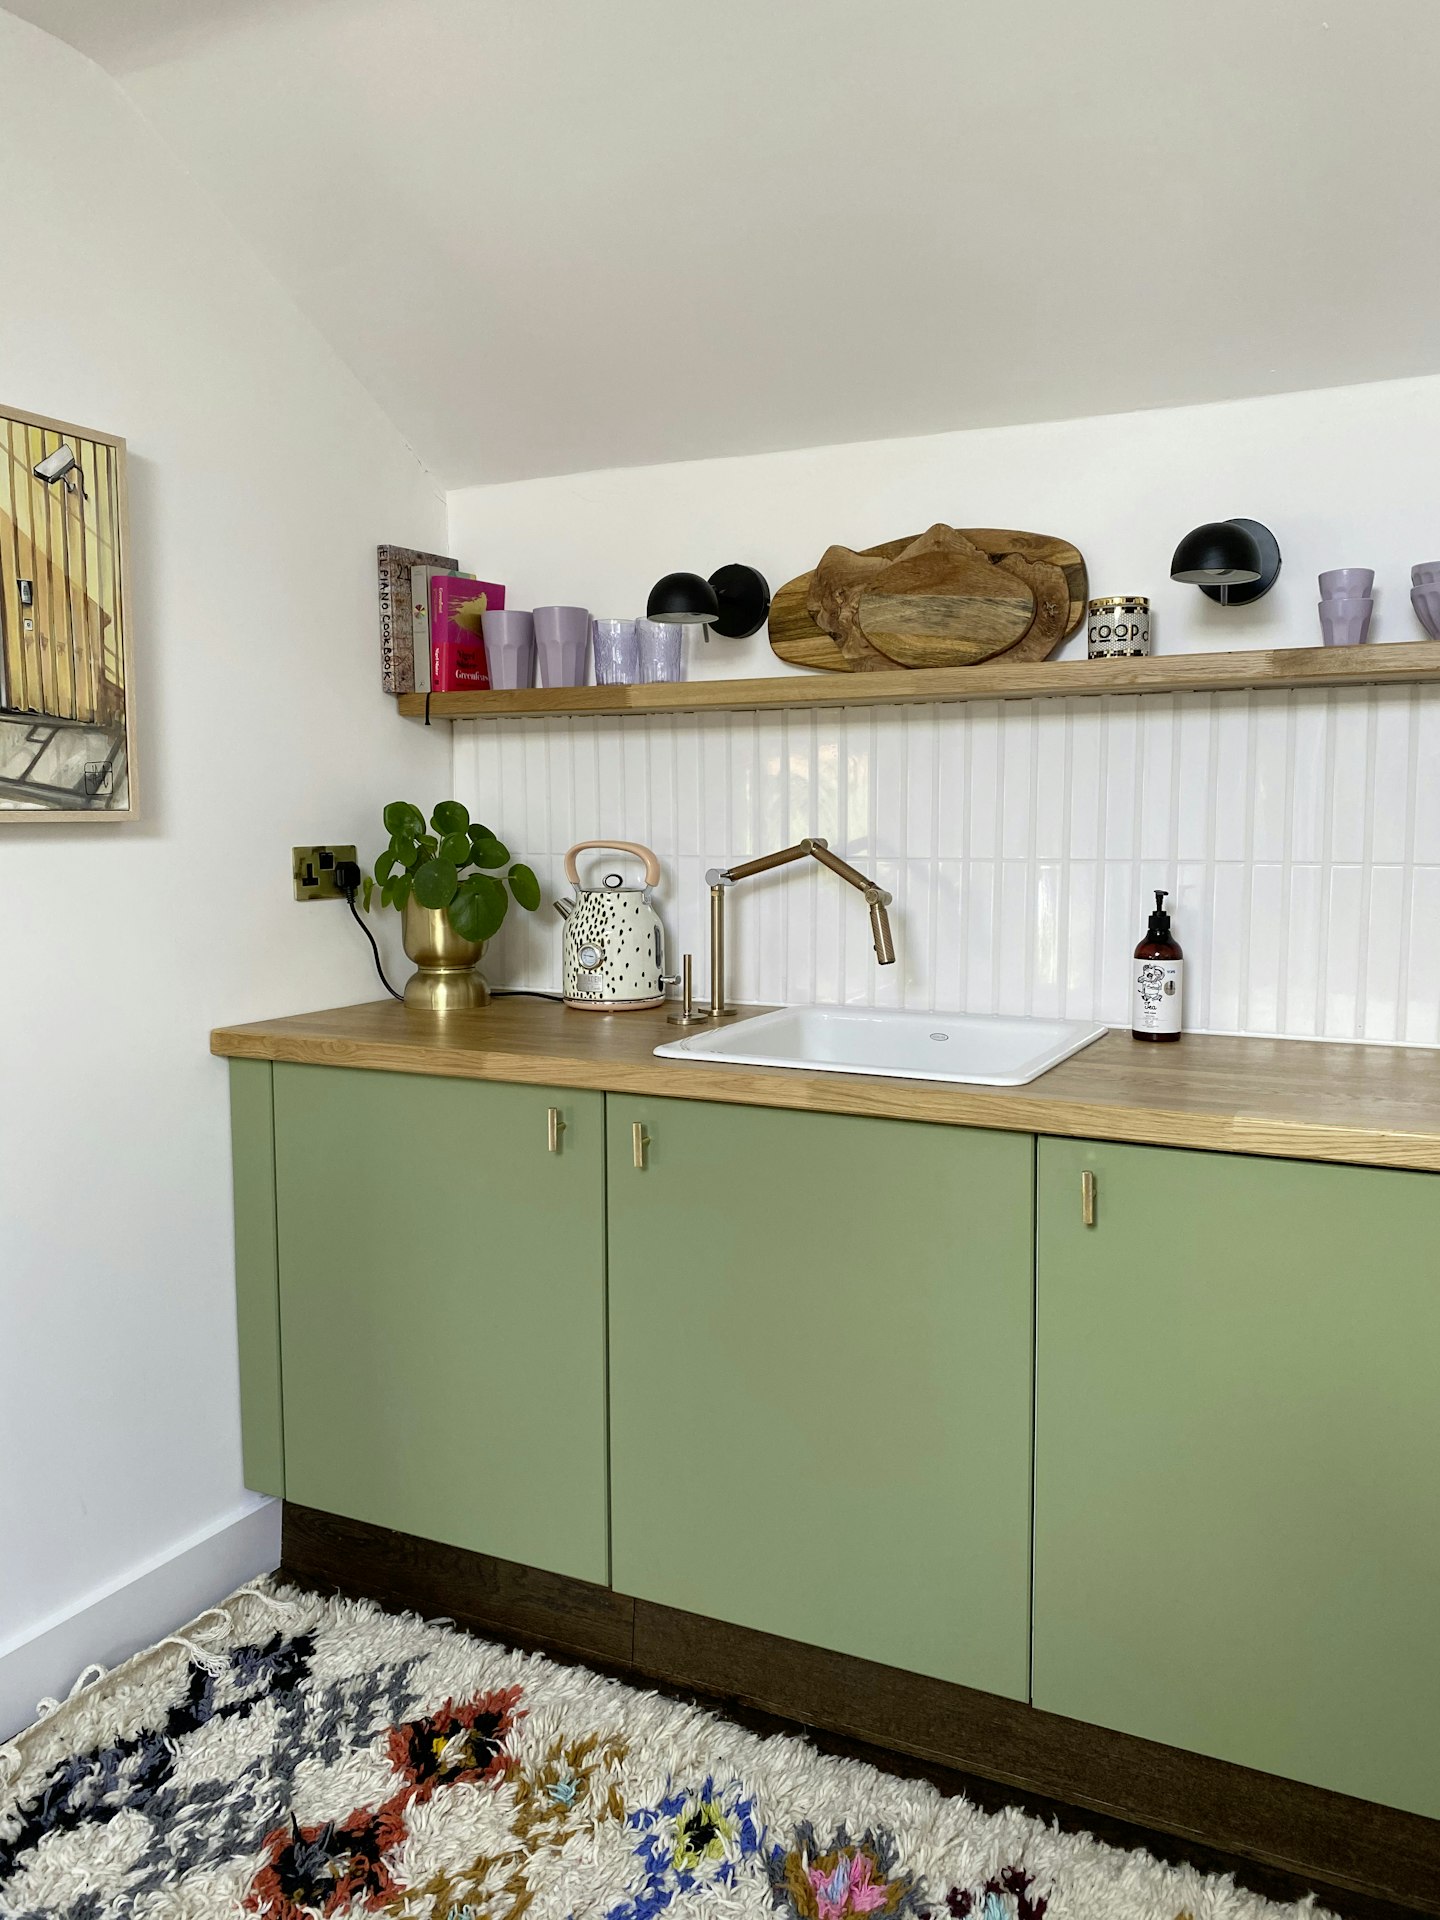 Replace tired kitchen cupboard doors